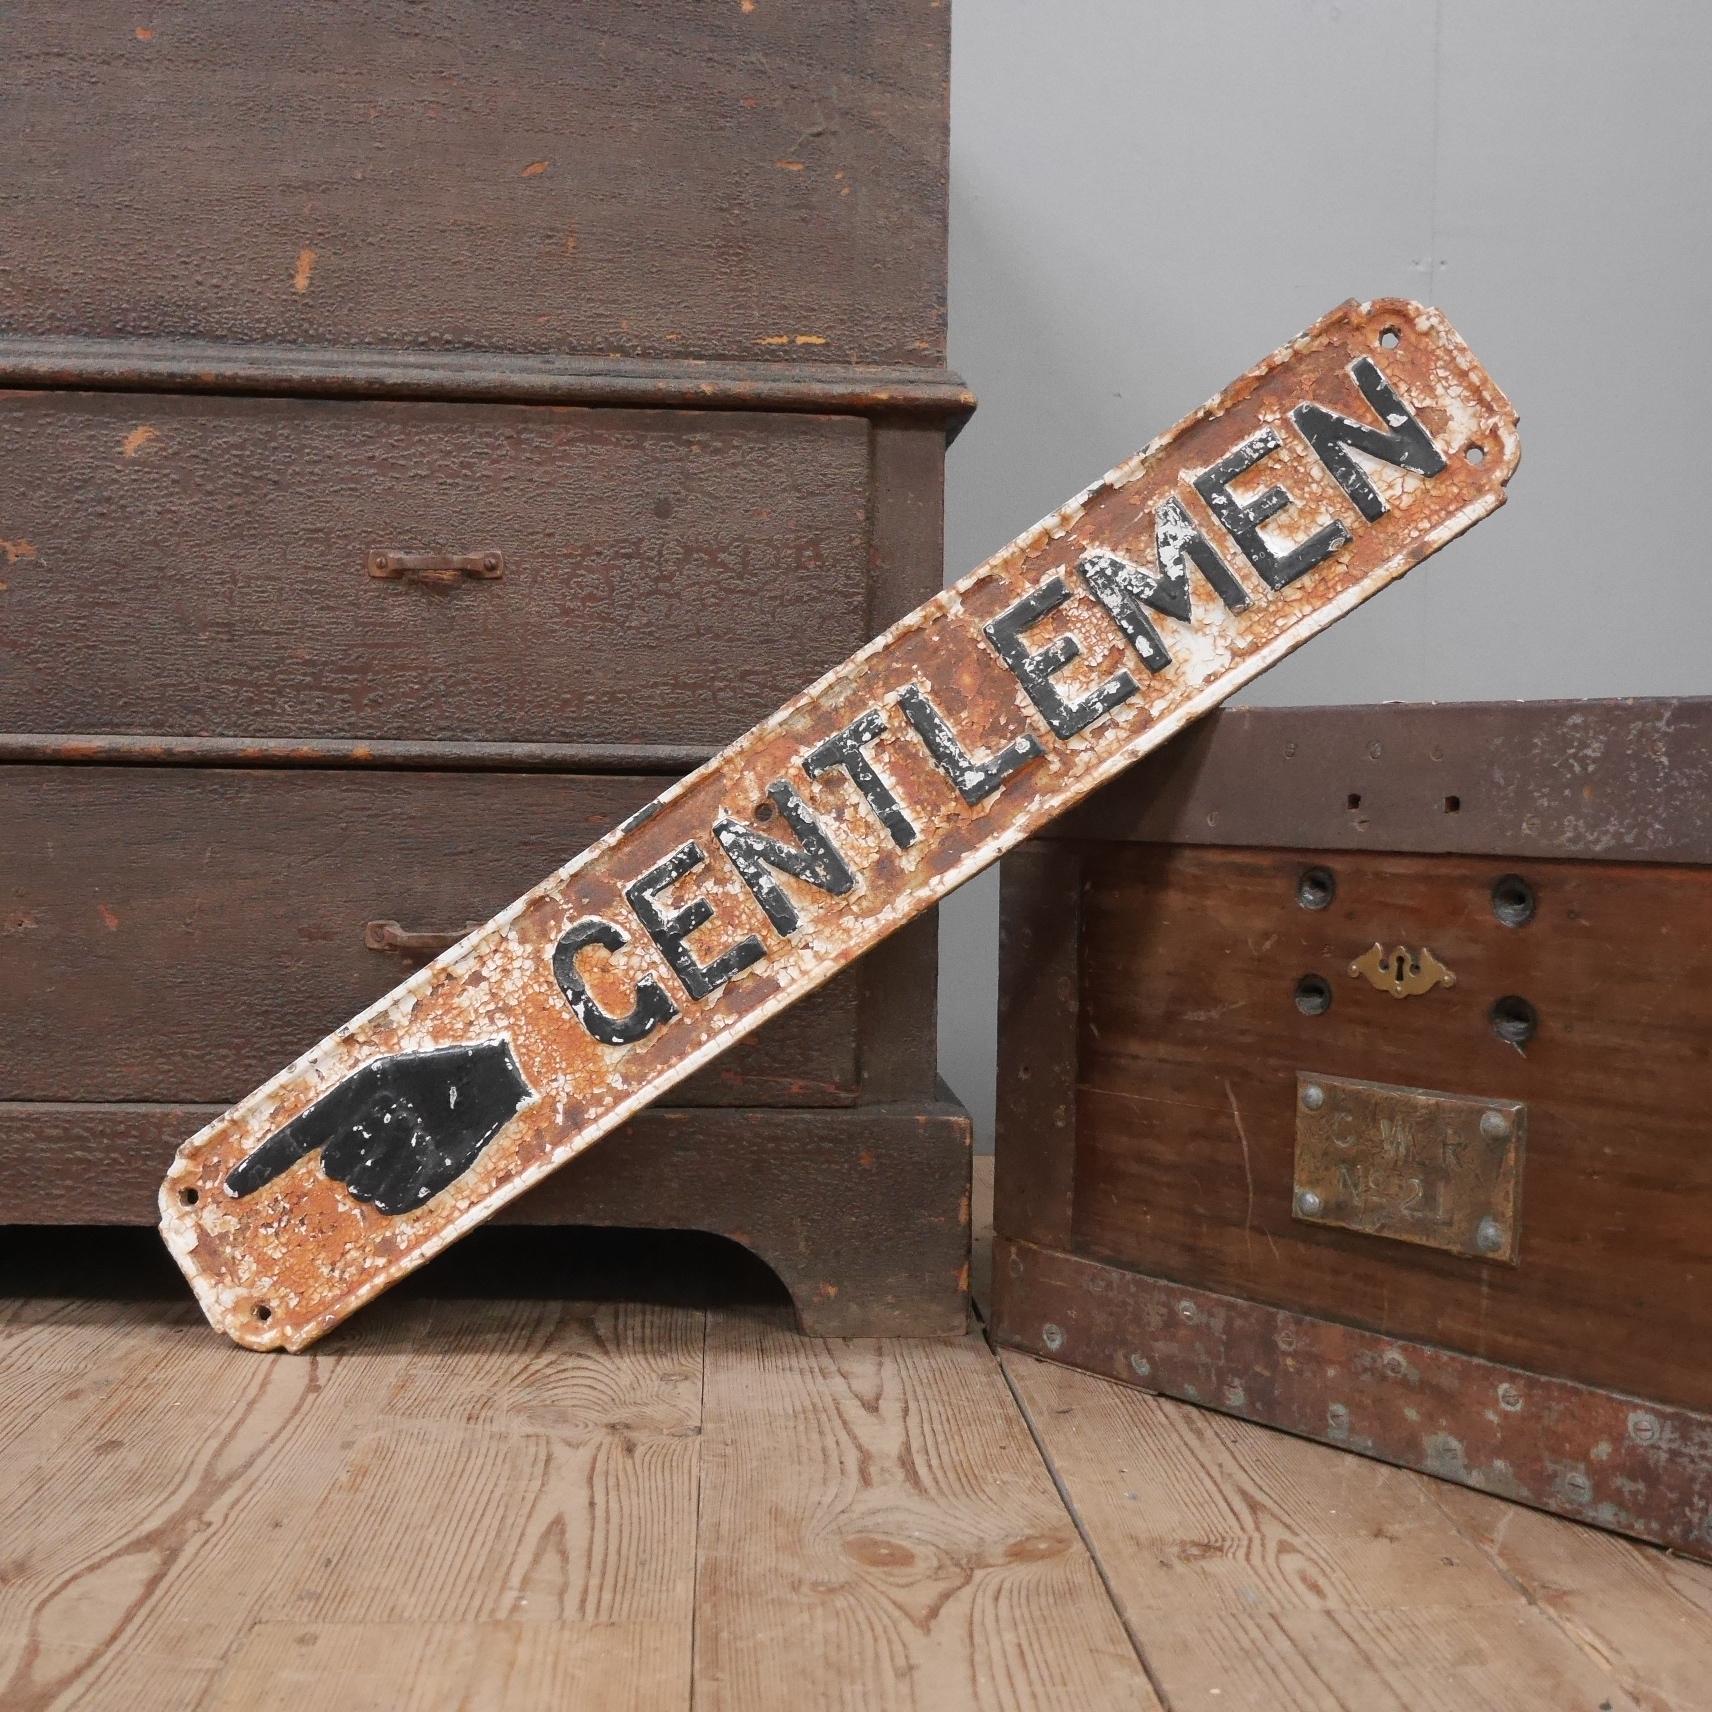 A Victorian 'Gentlemen' cast iron railway sign.
A very rare 19th century cast iron railway sign with pointing-hand or 'manicule' detail & original paint with a fab untouched patina. Fresh to the market & a version which very rarely crops